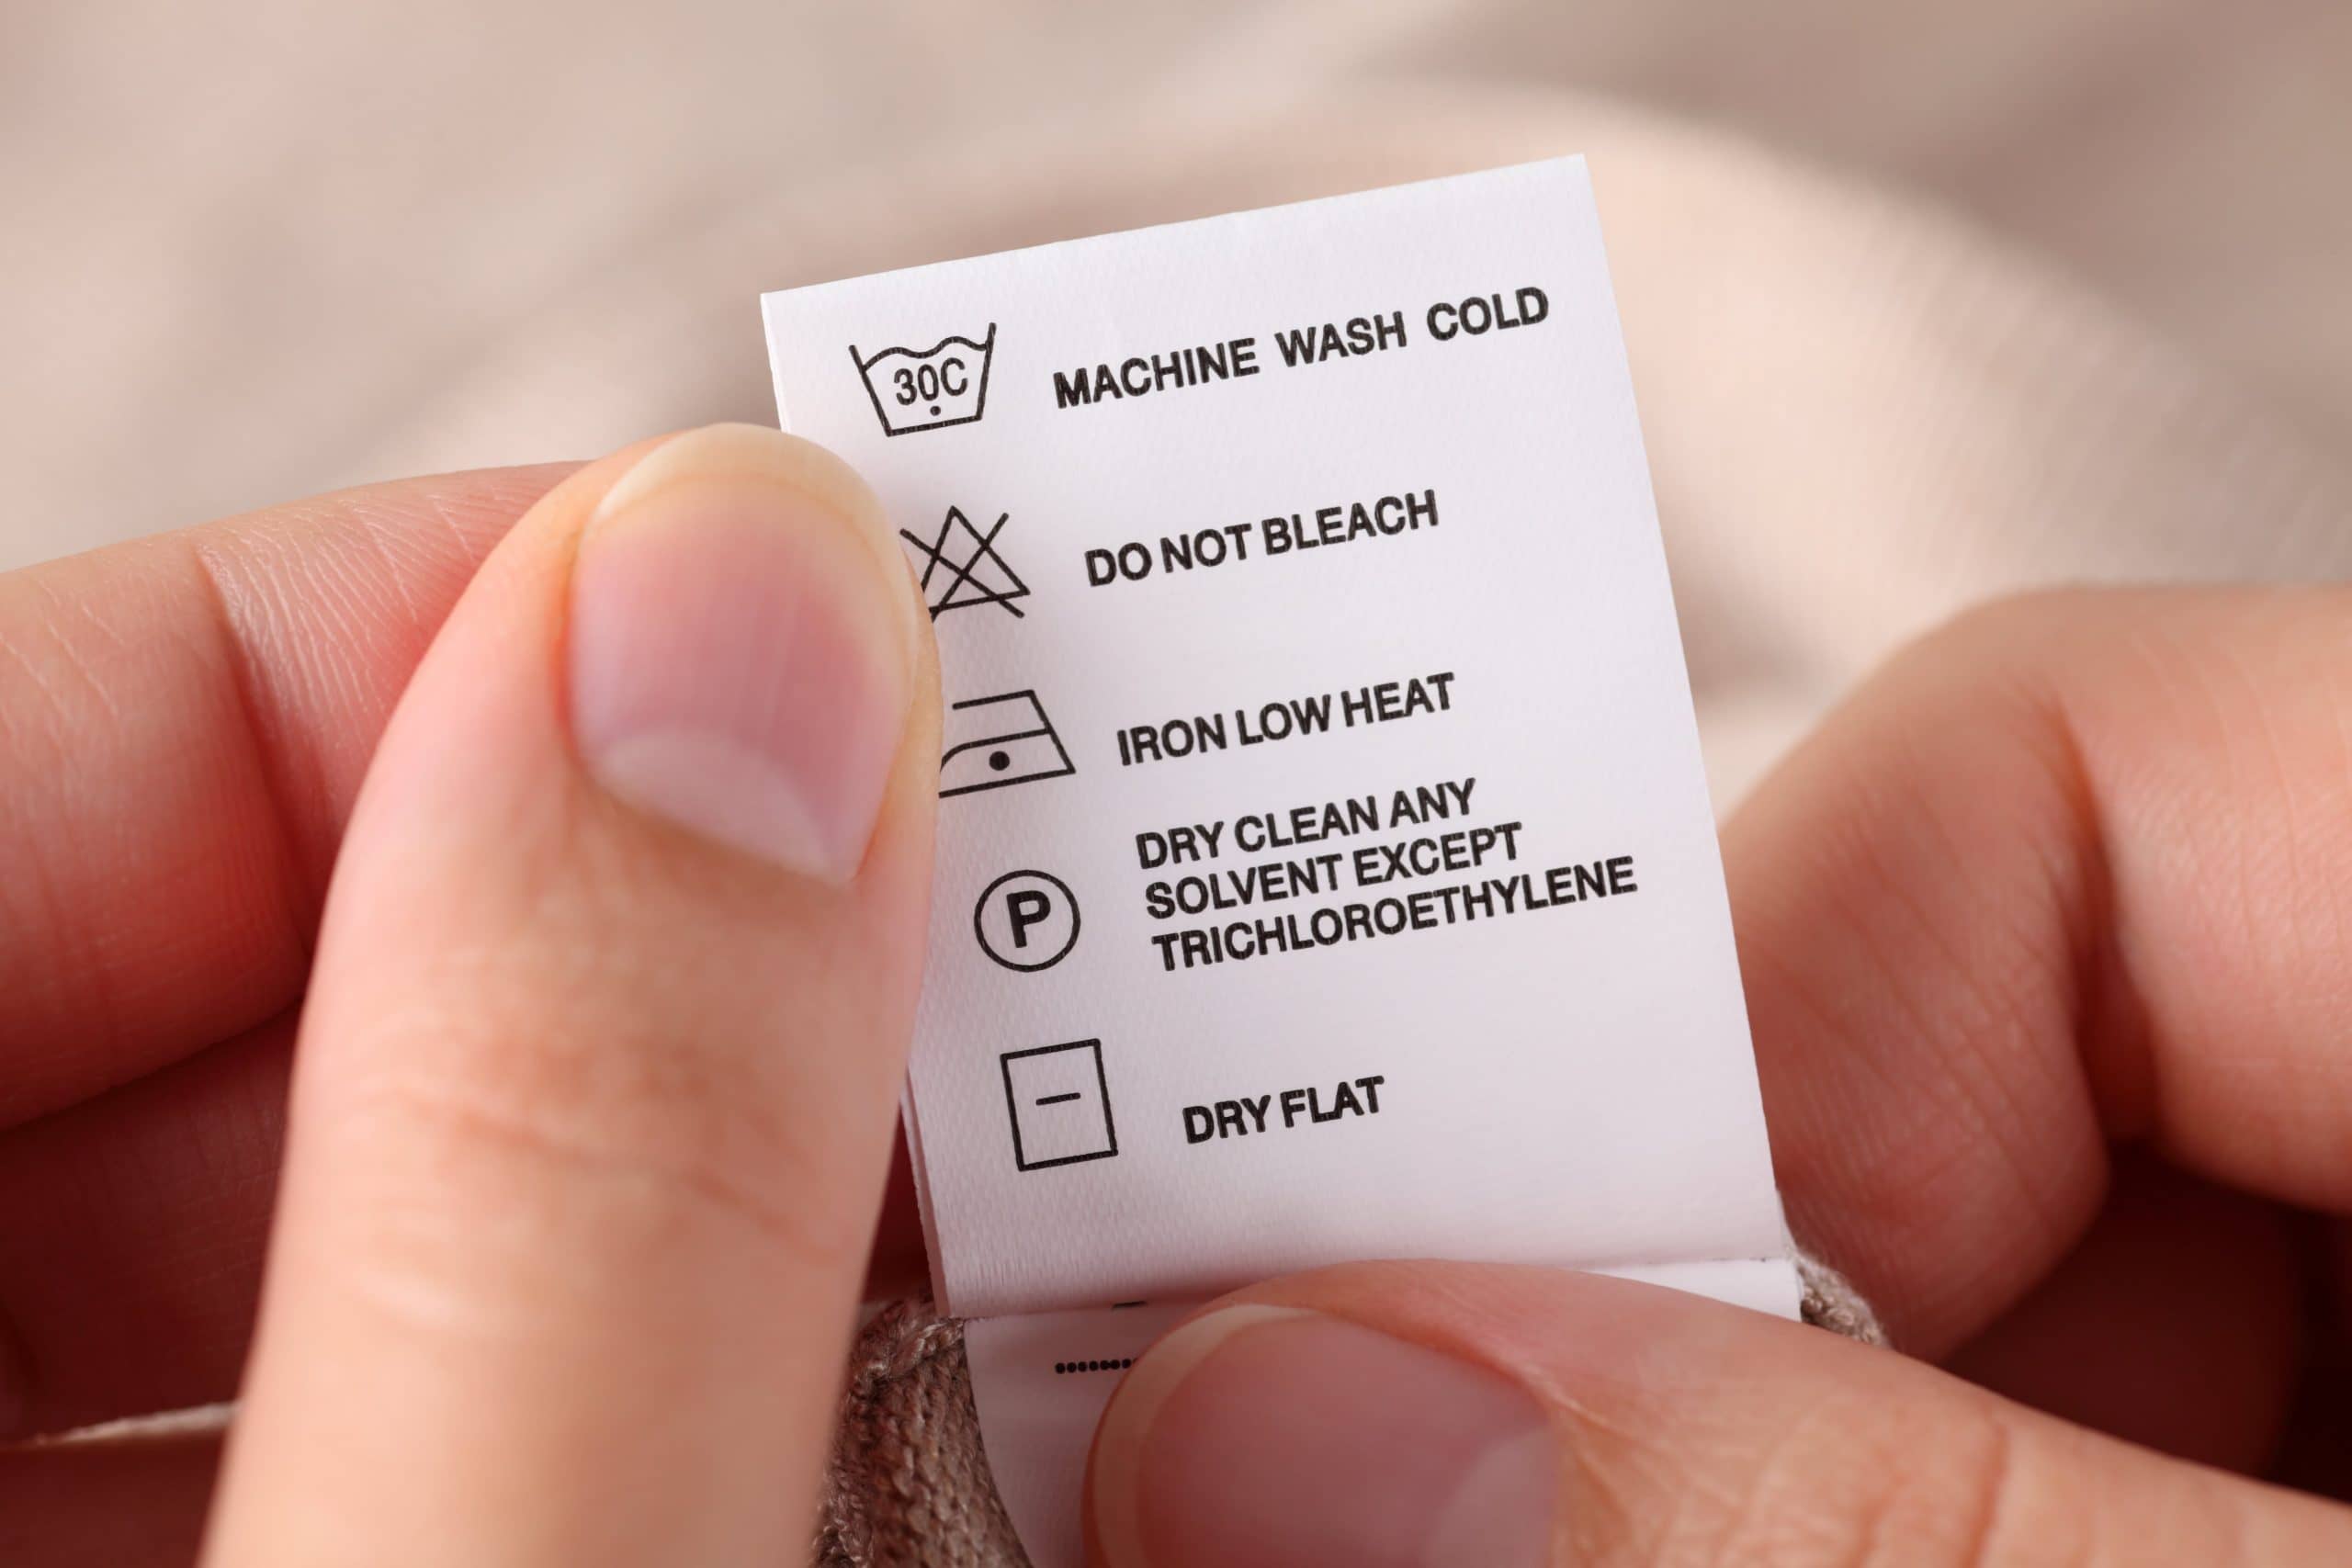 What goes into Clothing labels?, Textile Manufacturing